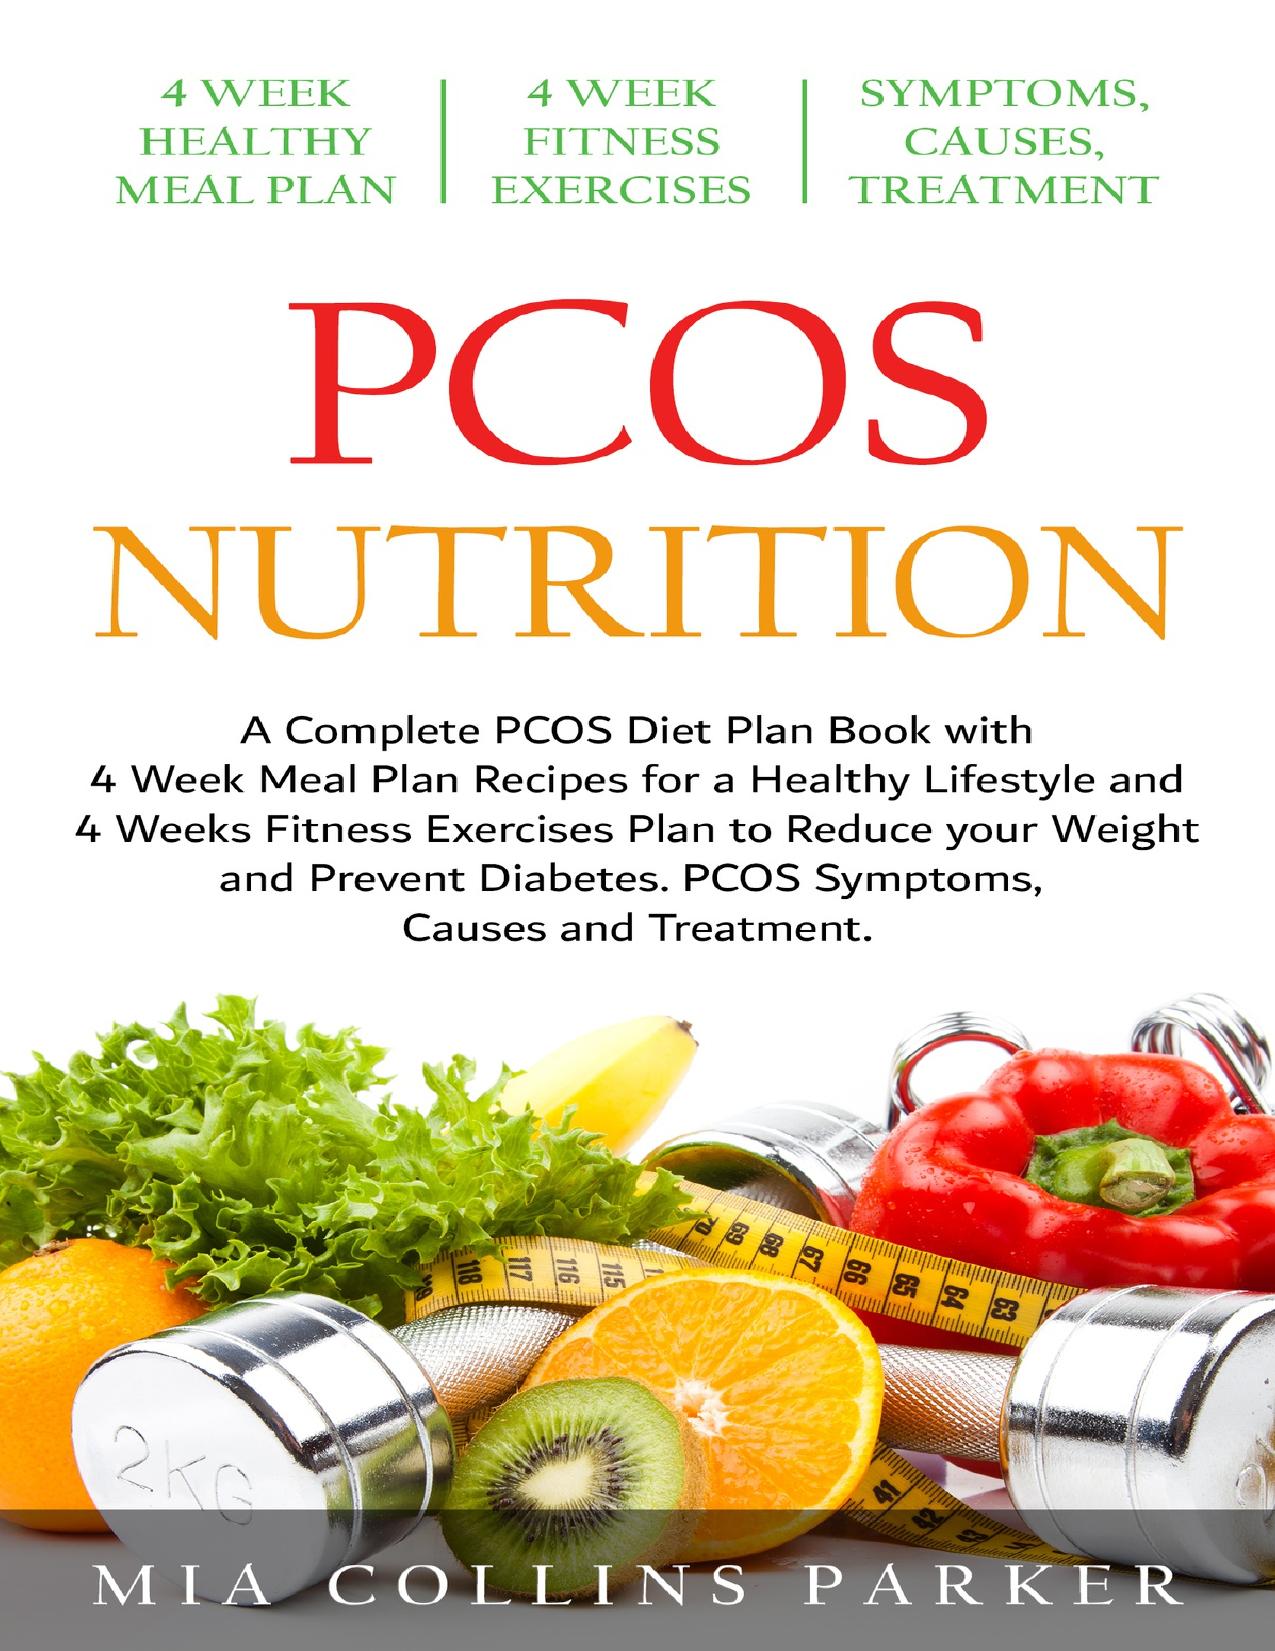 PCOS Nutrition: A Complete PCOS Diet Book with 4 Week Meal Plan and 4 Week Fitness Exercise Plan to Reduce Weight and Prevent Diabetes. PCOS Causes, Symptoms and Holistic Treatments. by Collins Parker Mia